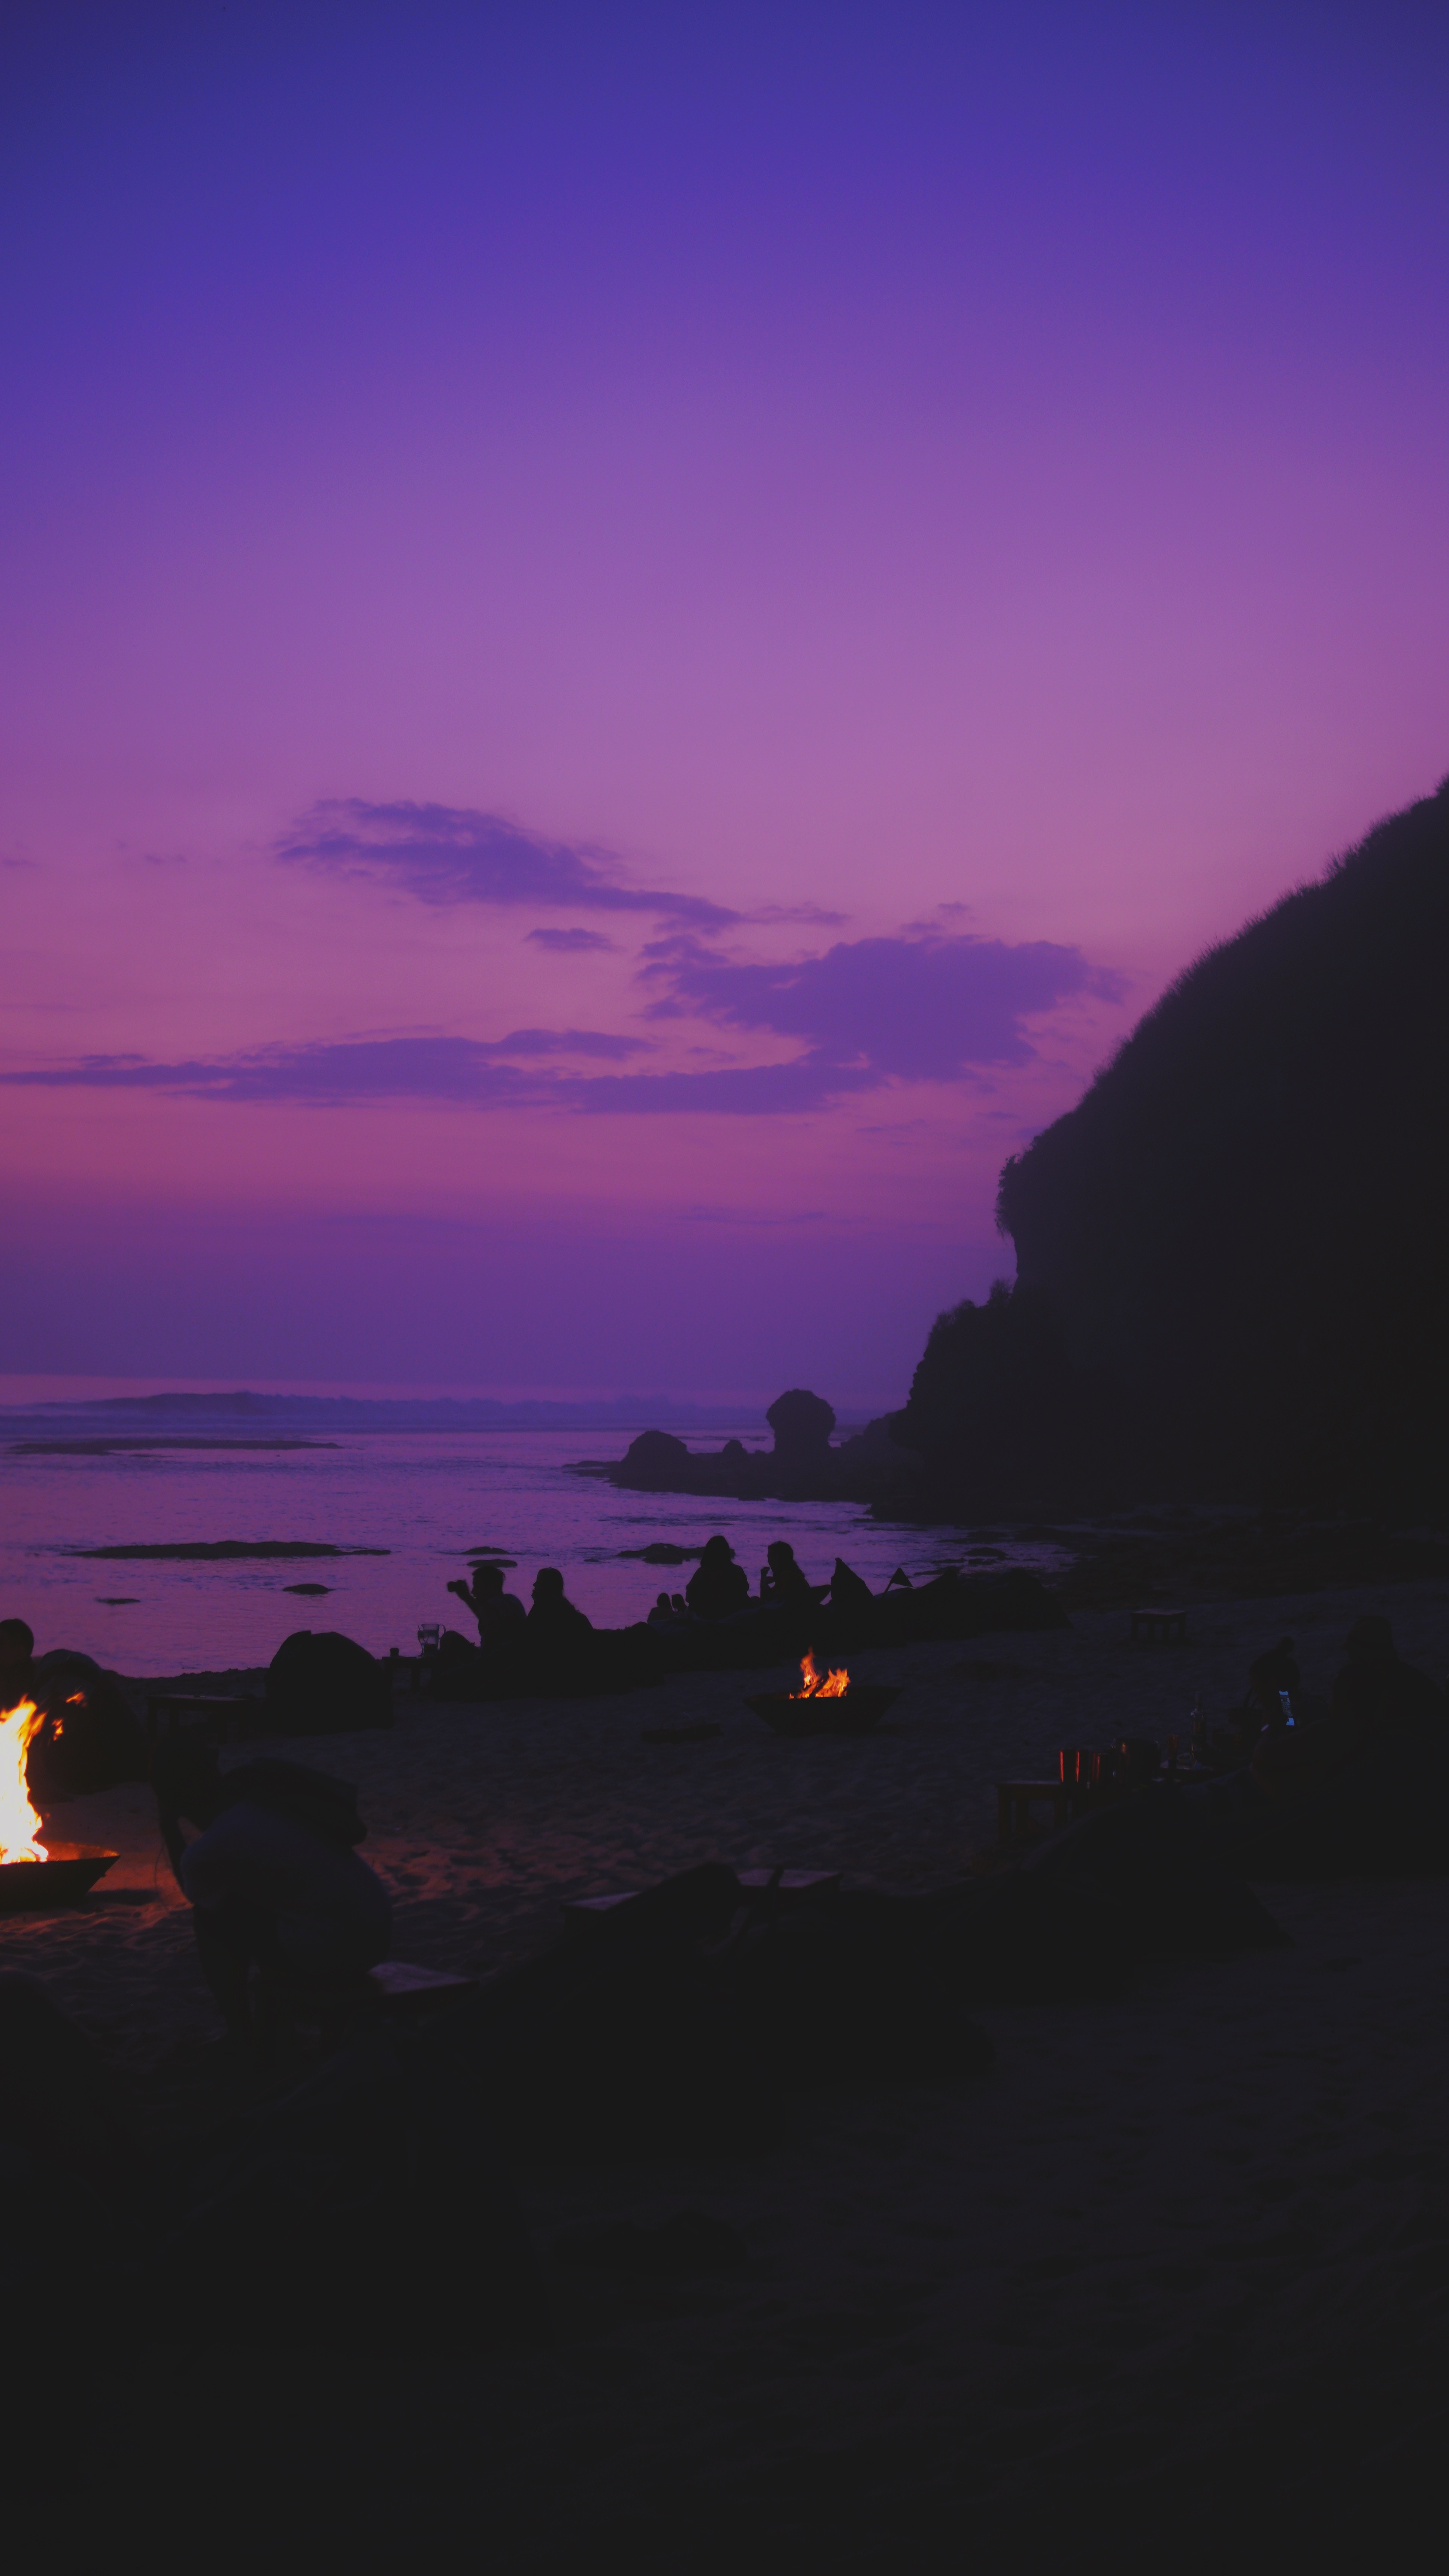 indonesia, relaxation, beach, dark, silhouettes, sunset, shore, bank, rest Full HD